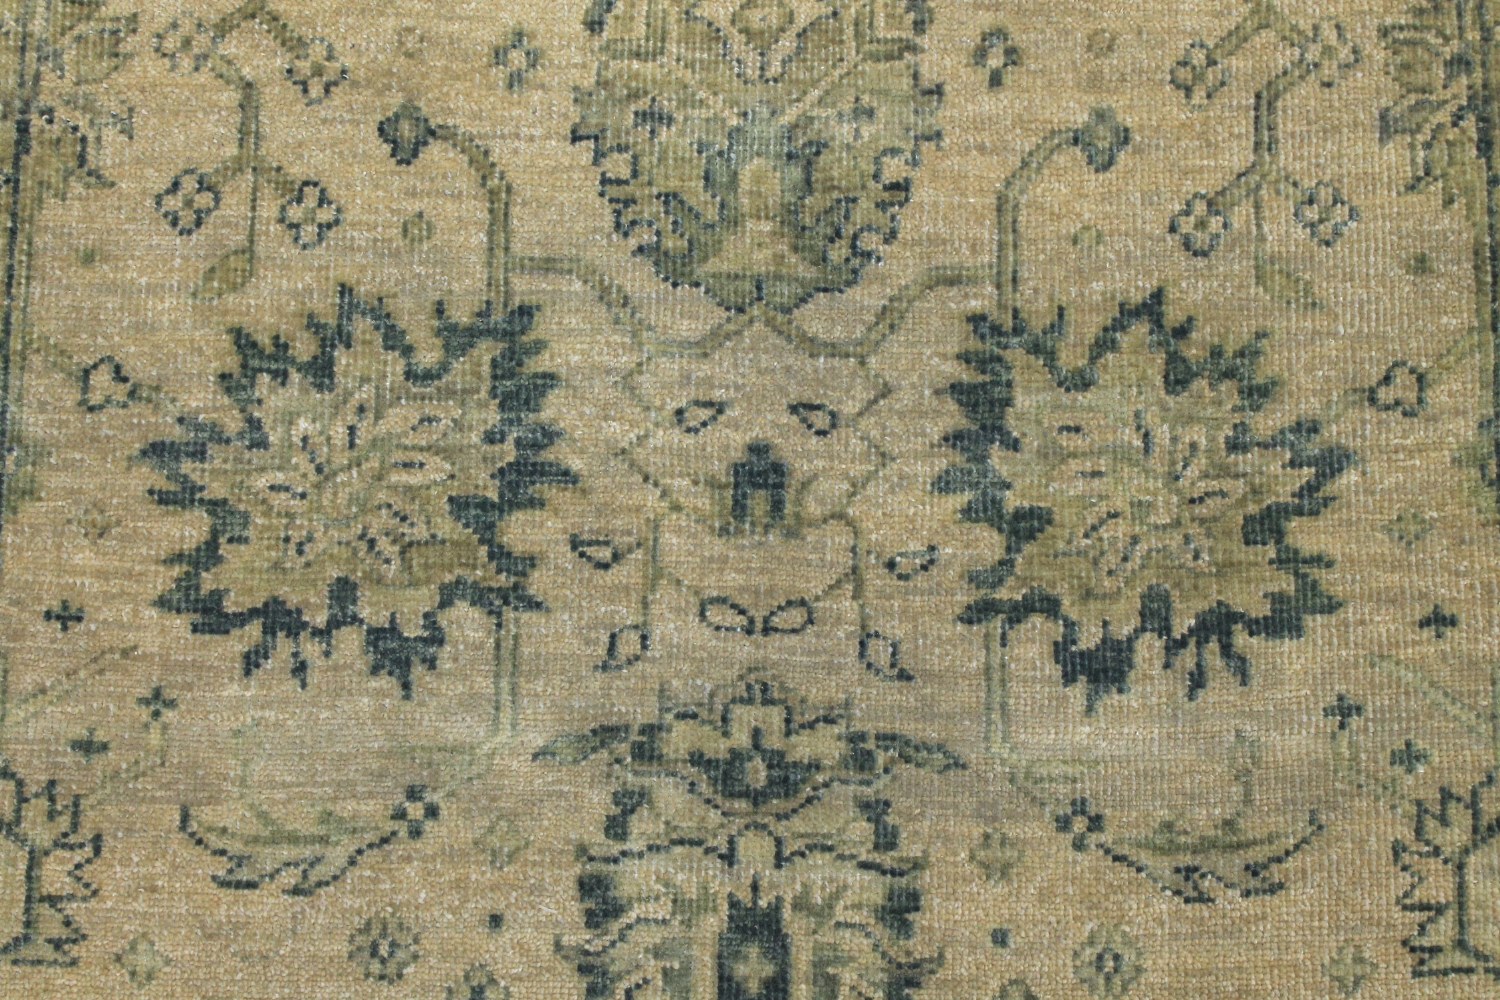 4x6 Oushak Hand Knotted Wool Area Rug - MR17015